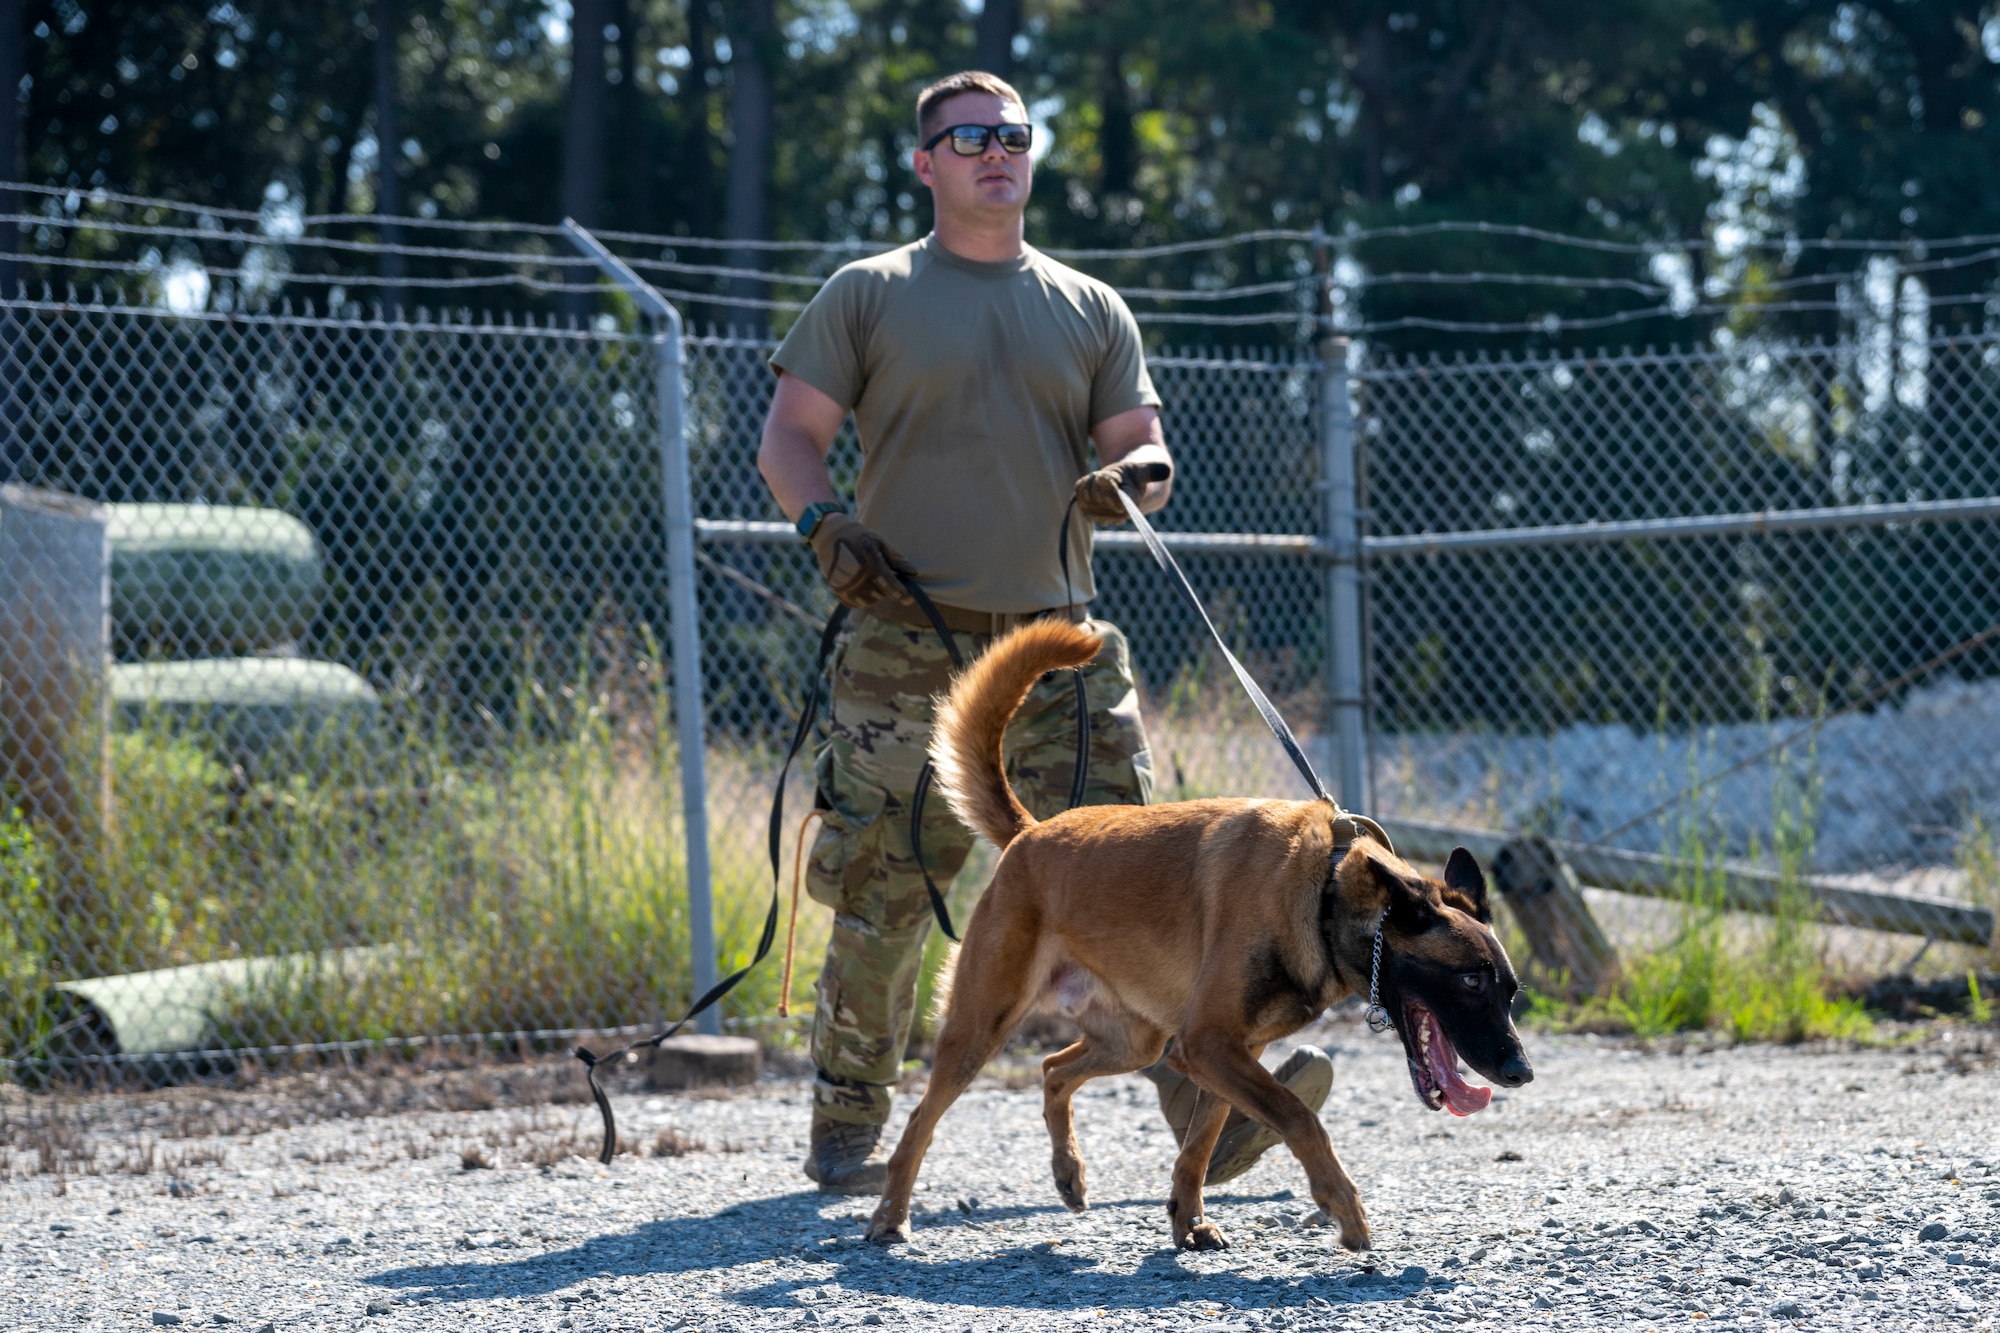 Staff Sgt. Kyle Johnson, 4th Security Forces Squadron military working dog handler, and his MWD Eenoch, participate in a training exercise with the Raleigh-Durham International Airport Transportation Security Administration at Seymour Johnson Air Force Base, North Carolina, Sept. 21, 2022. Explosive detection lanes are used to raise a K-9 and their handler’s proficiency levels. (U.S. Air Force photo by Senior Airman Kevin Holloway)